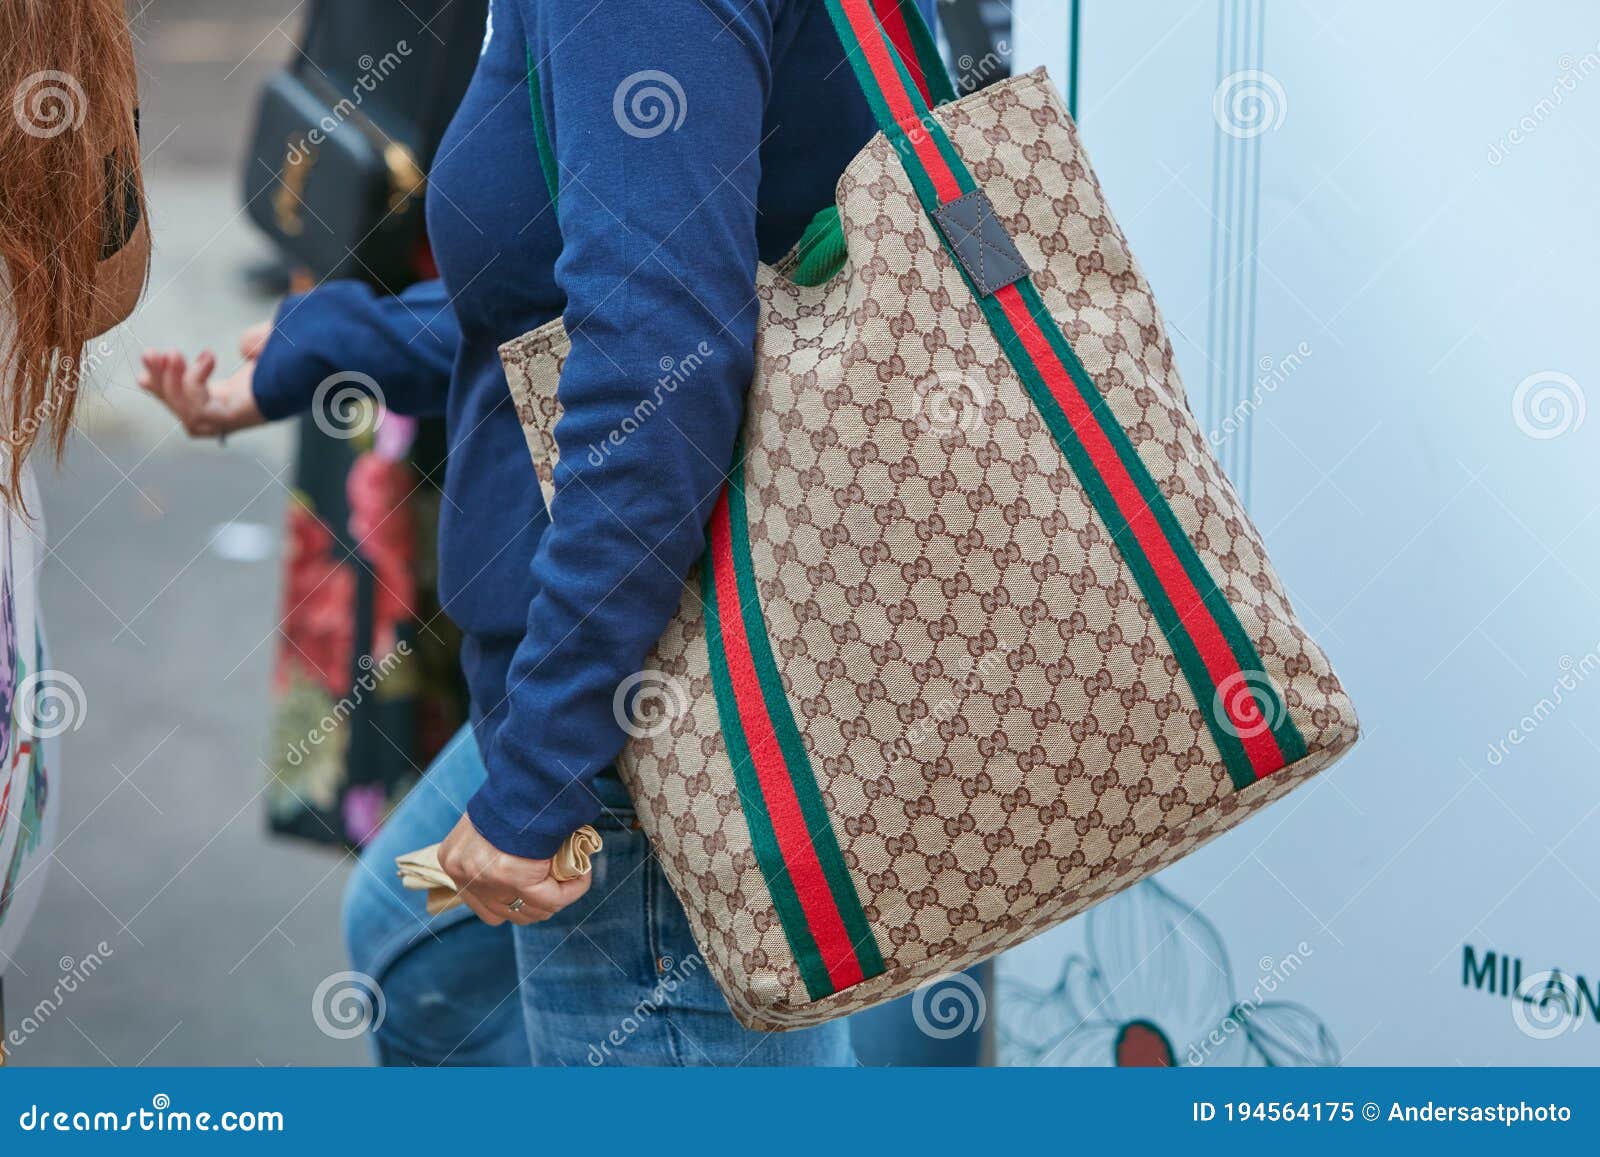 gucci bag green and red stripes